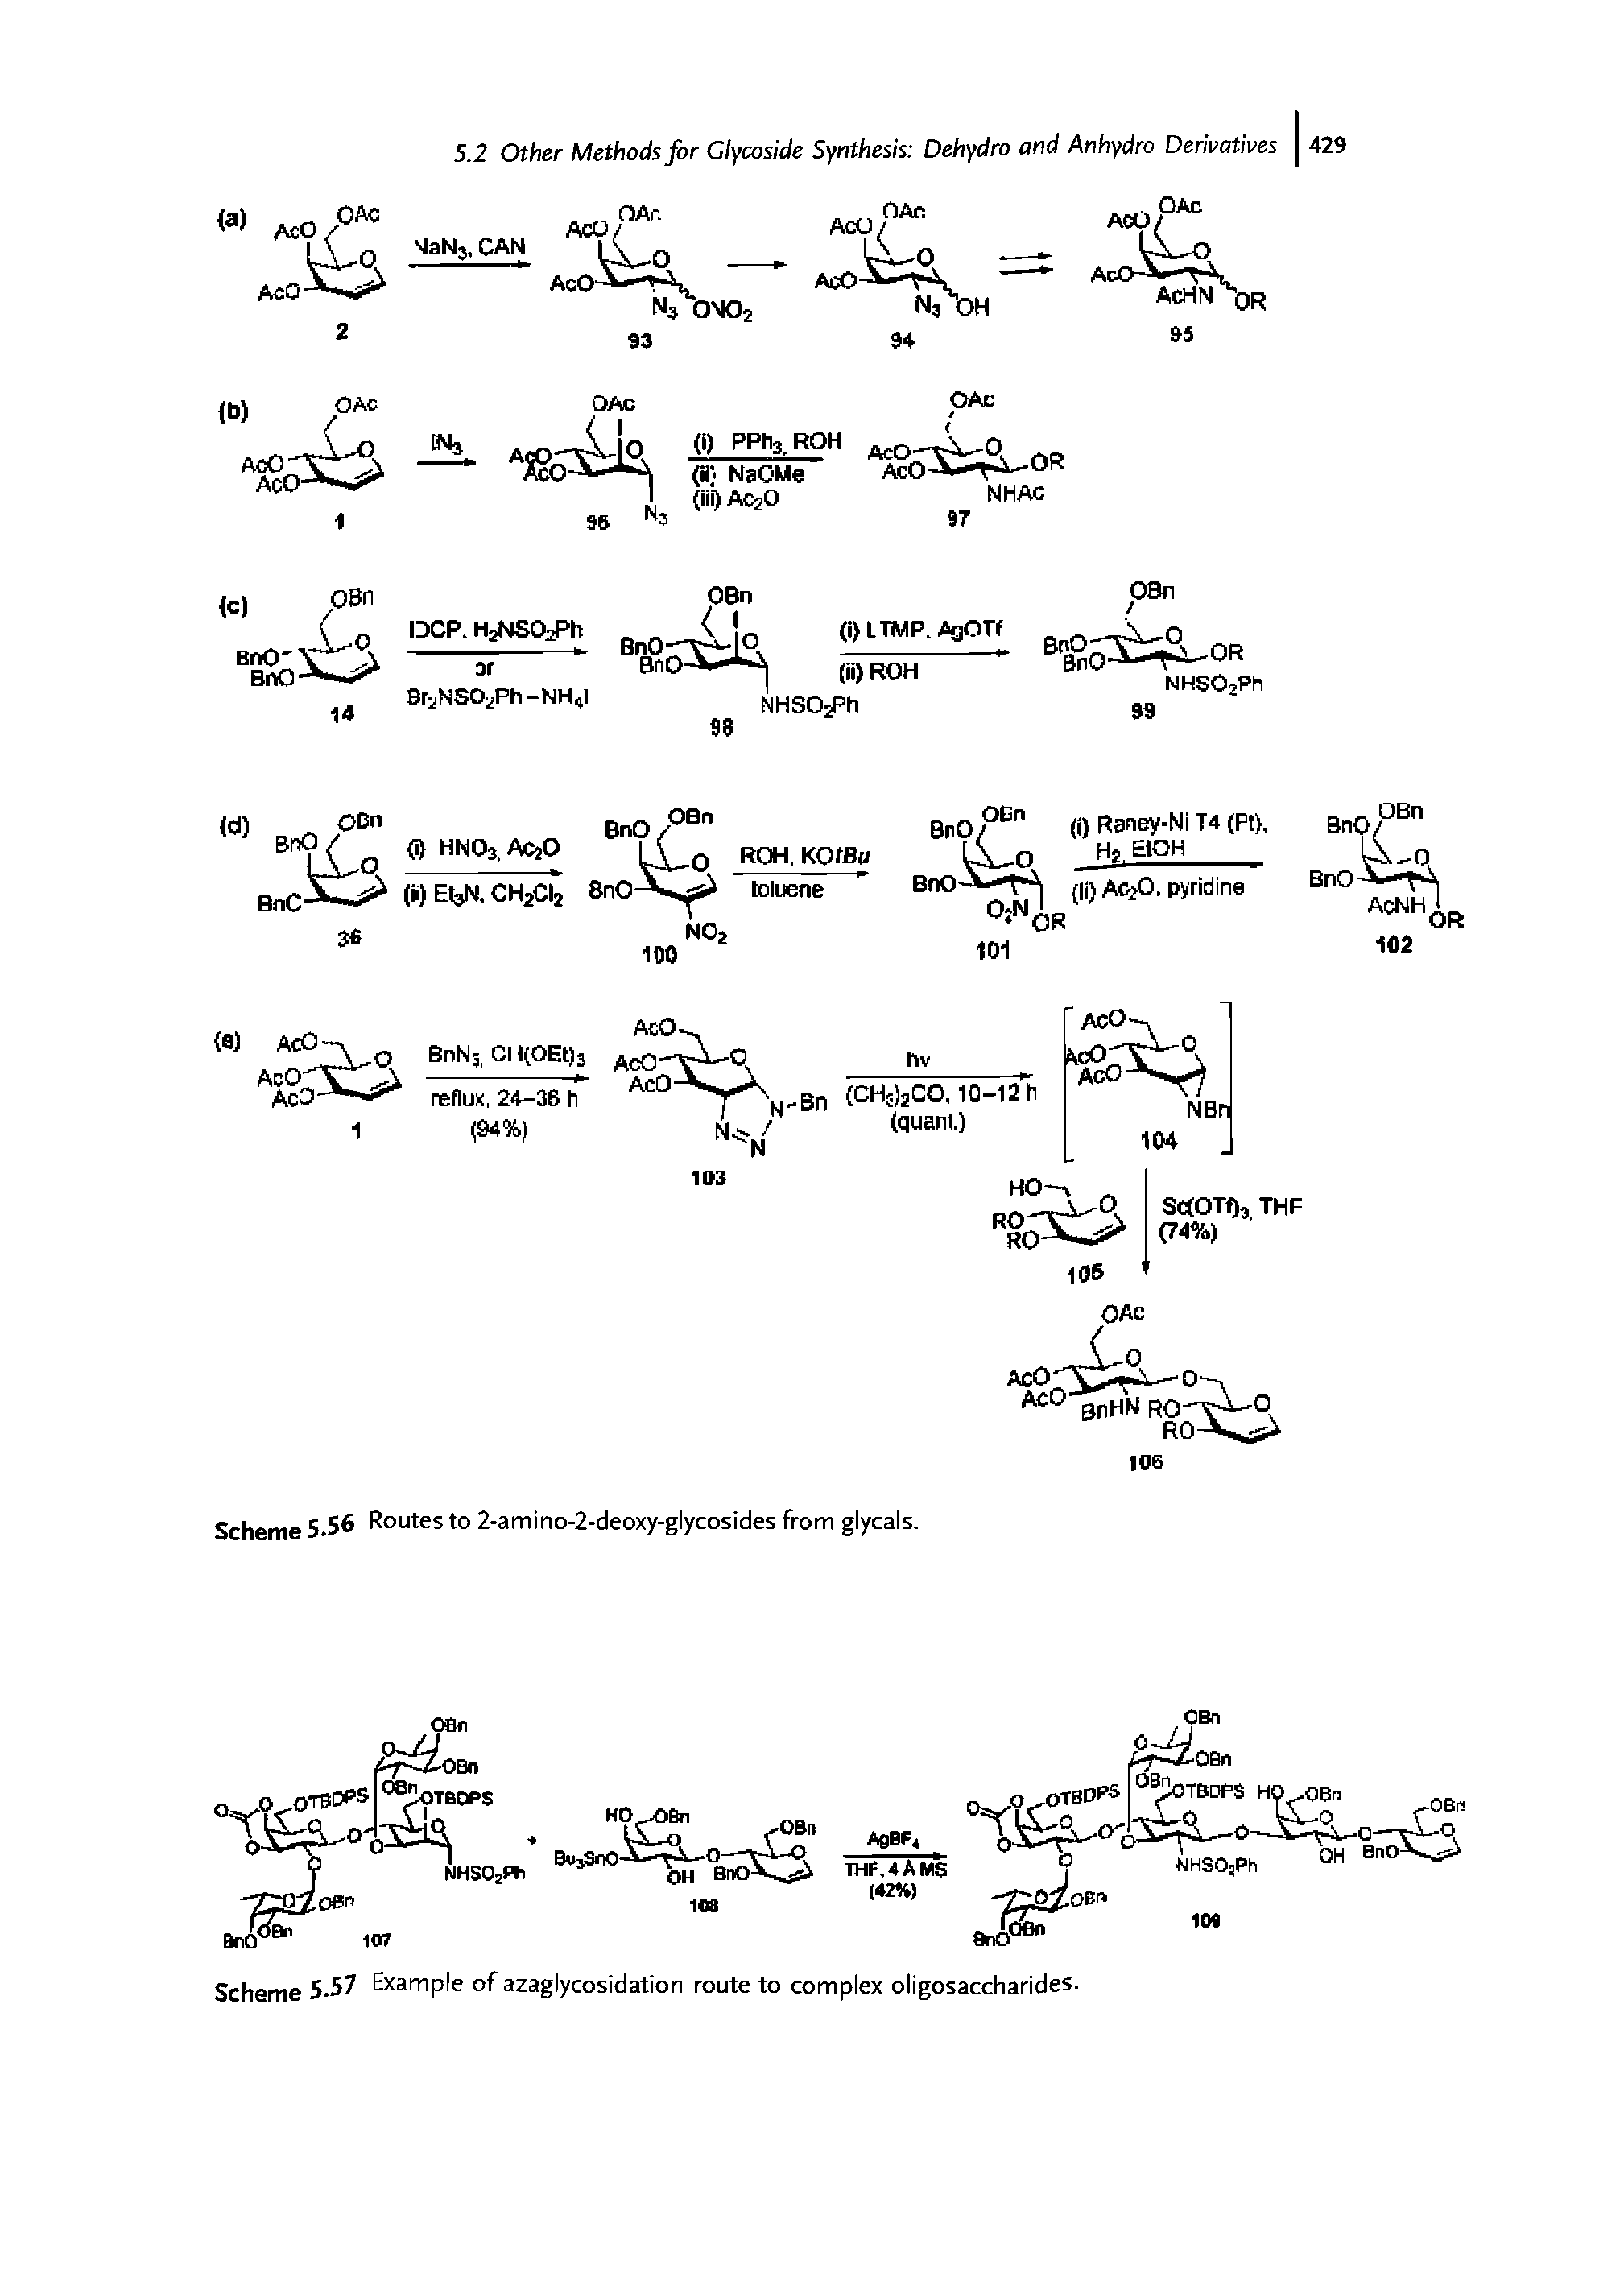 Scheme 5.56 Routes to 2-amino-2-deoxy-glycosides from glycals.